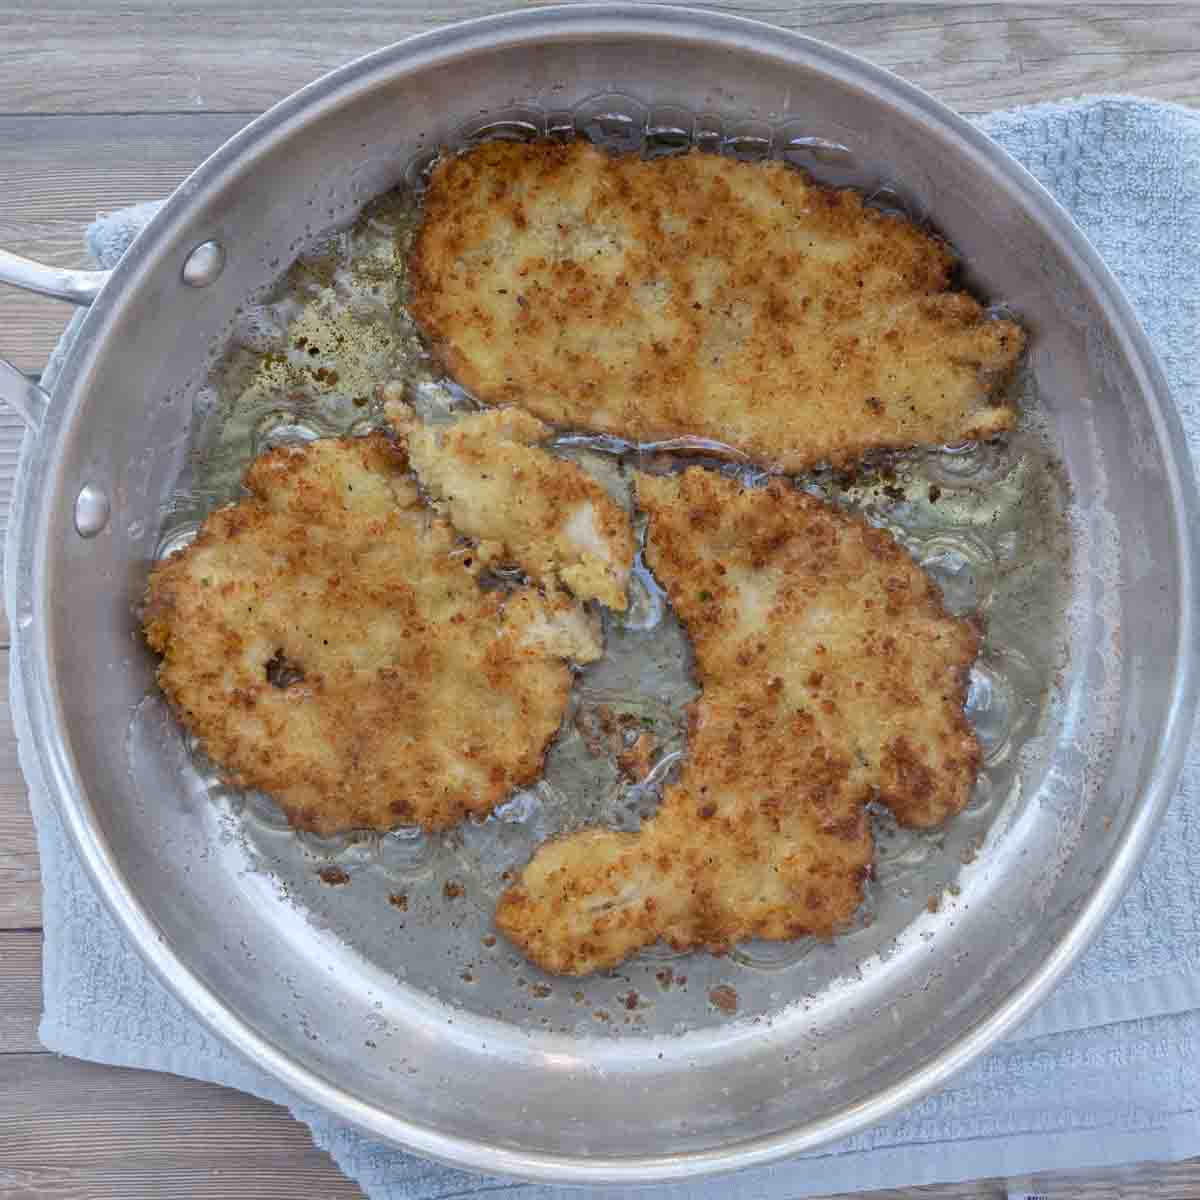 cooking breaded cutlets in frying pan.